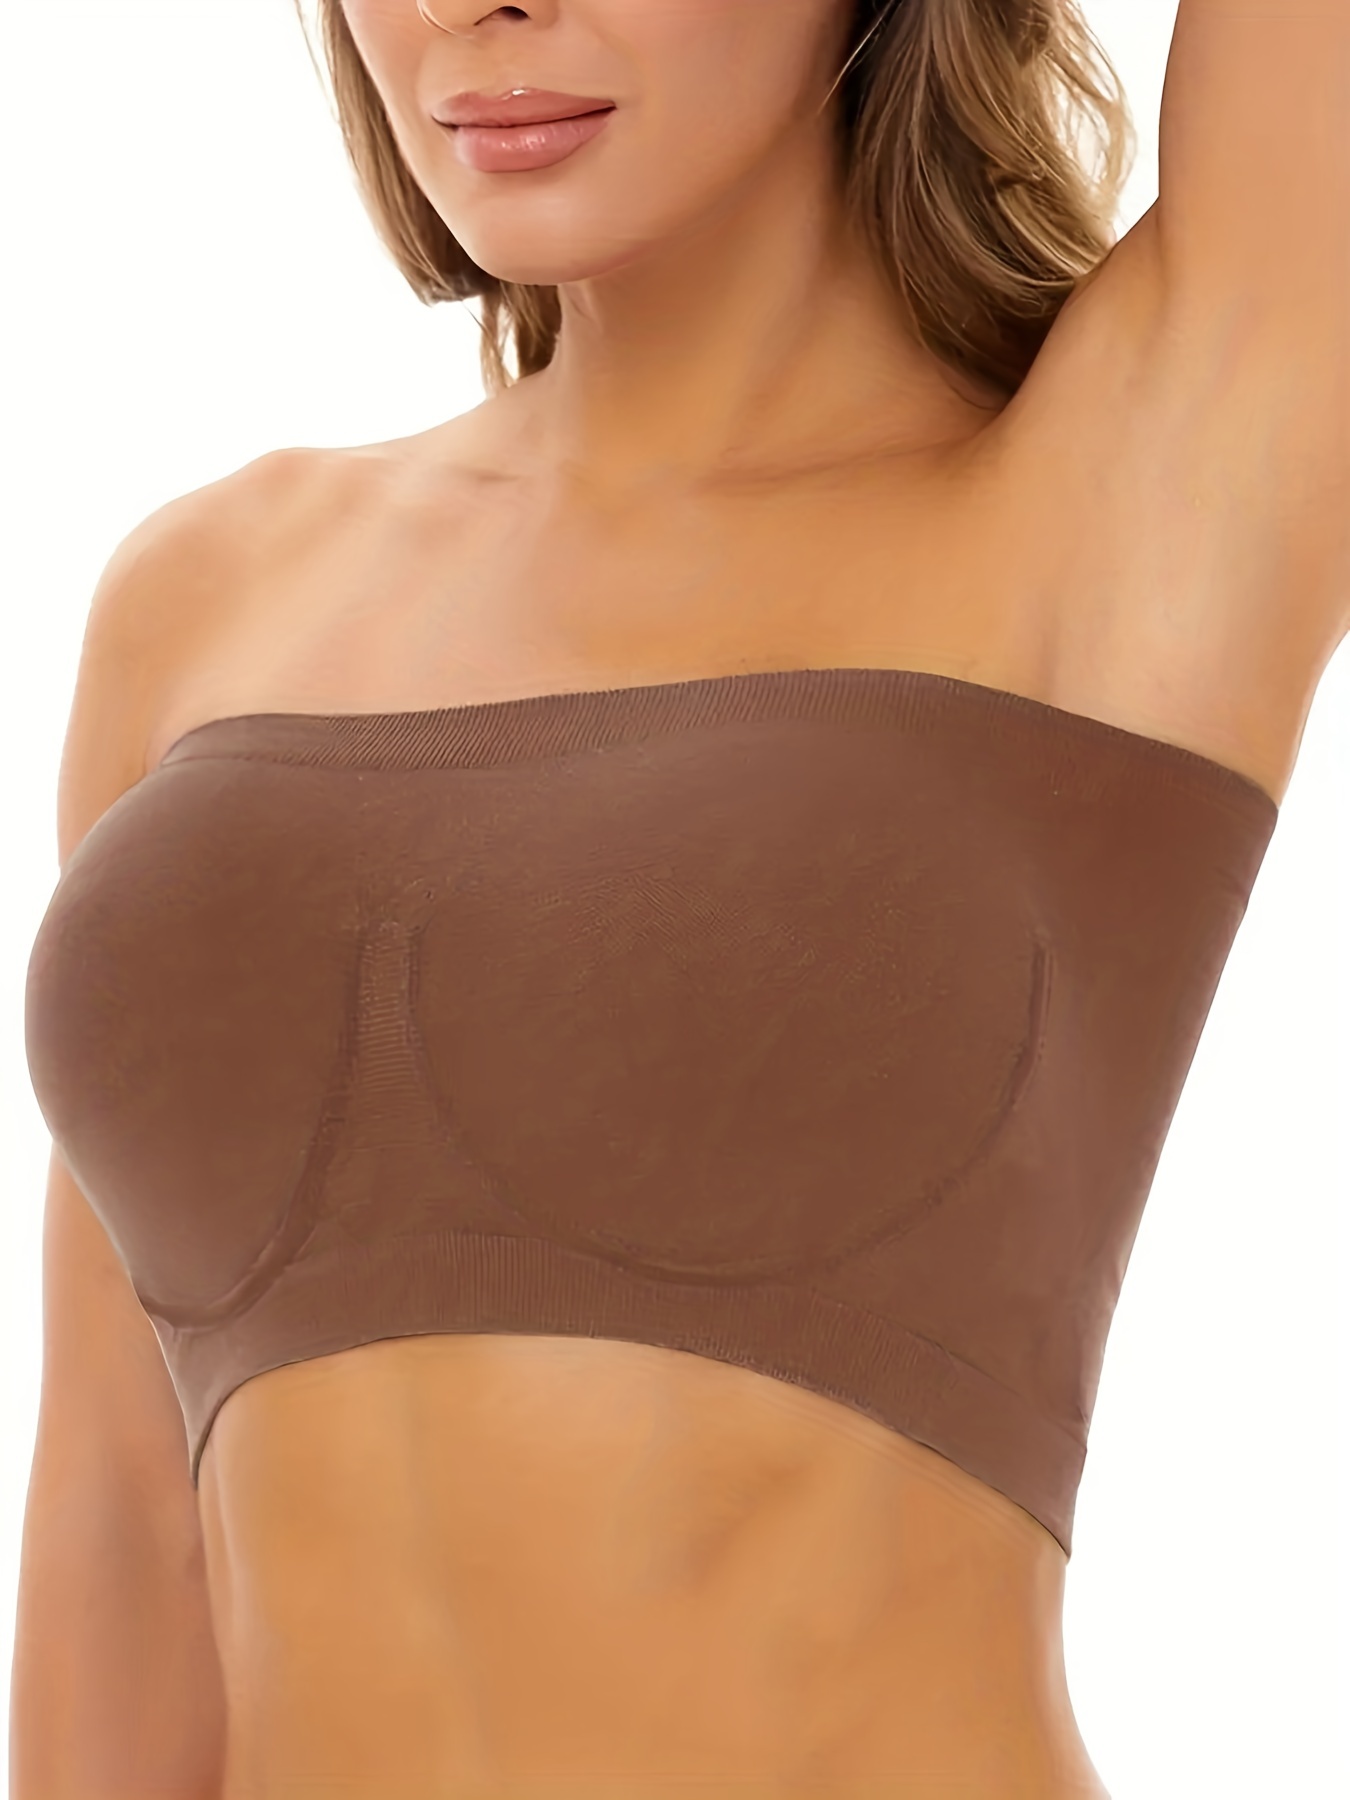 Qcmgmg Strapless Bras for Women Plus Size Seamless Bandeau